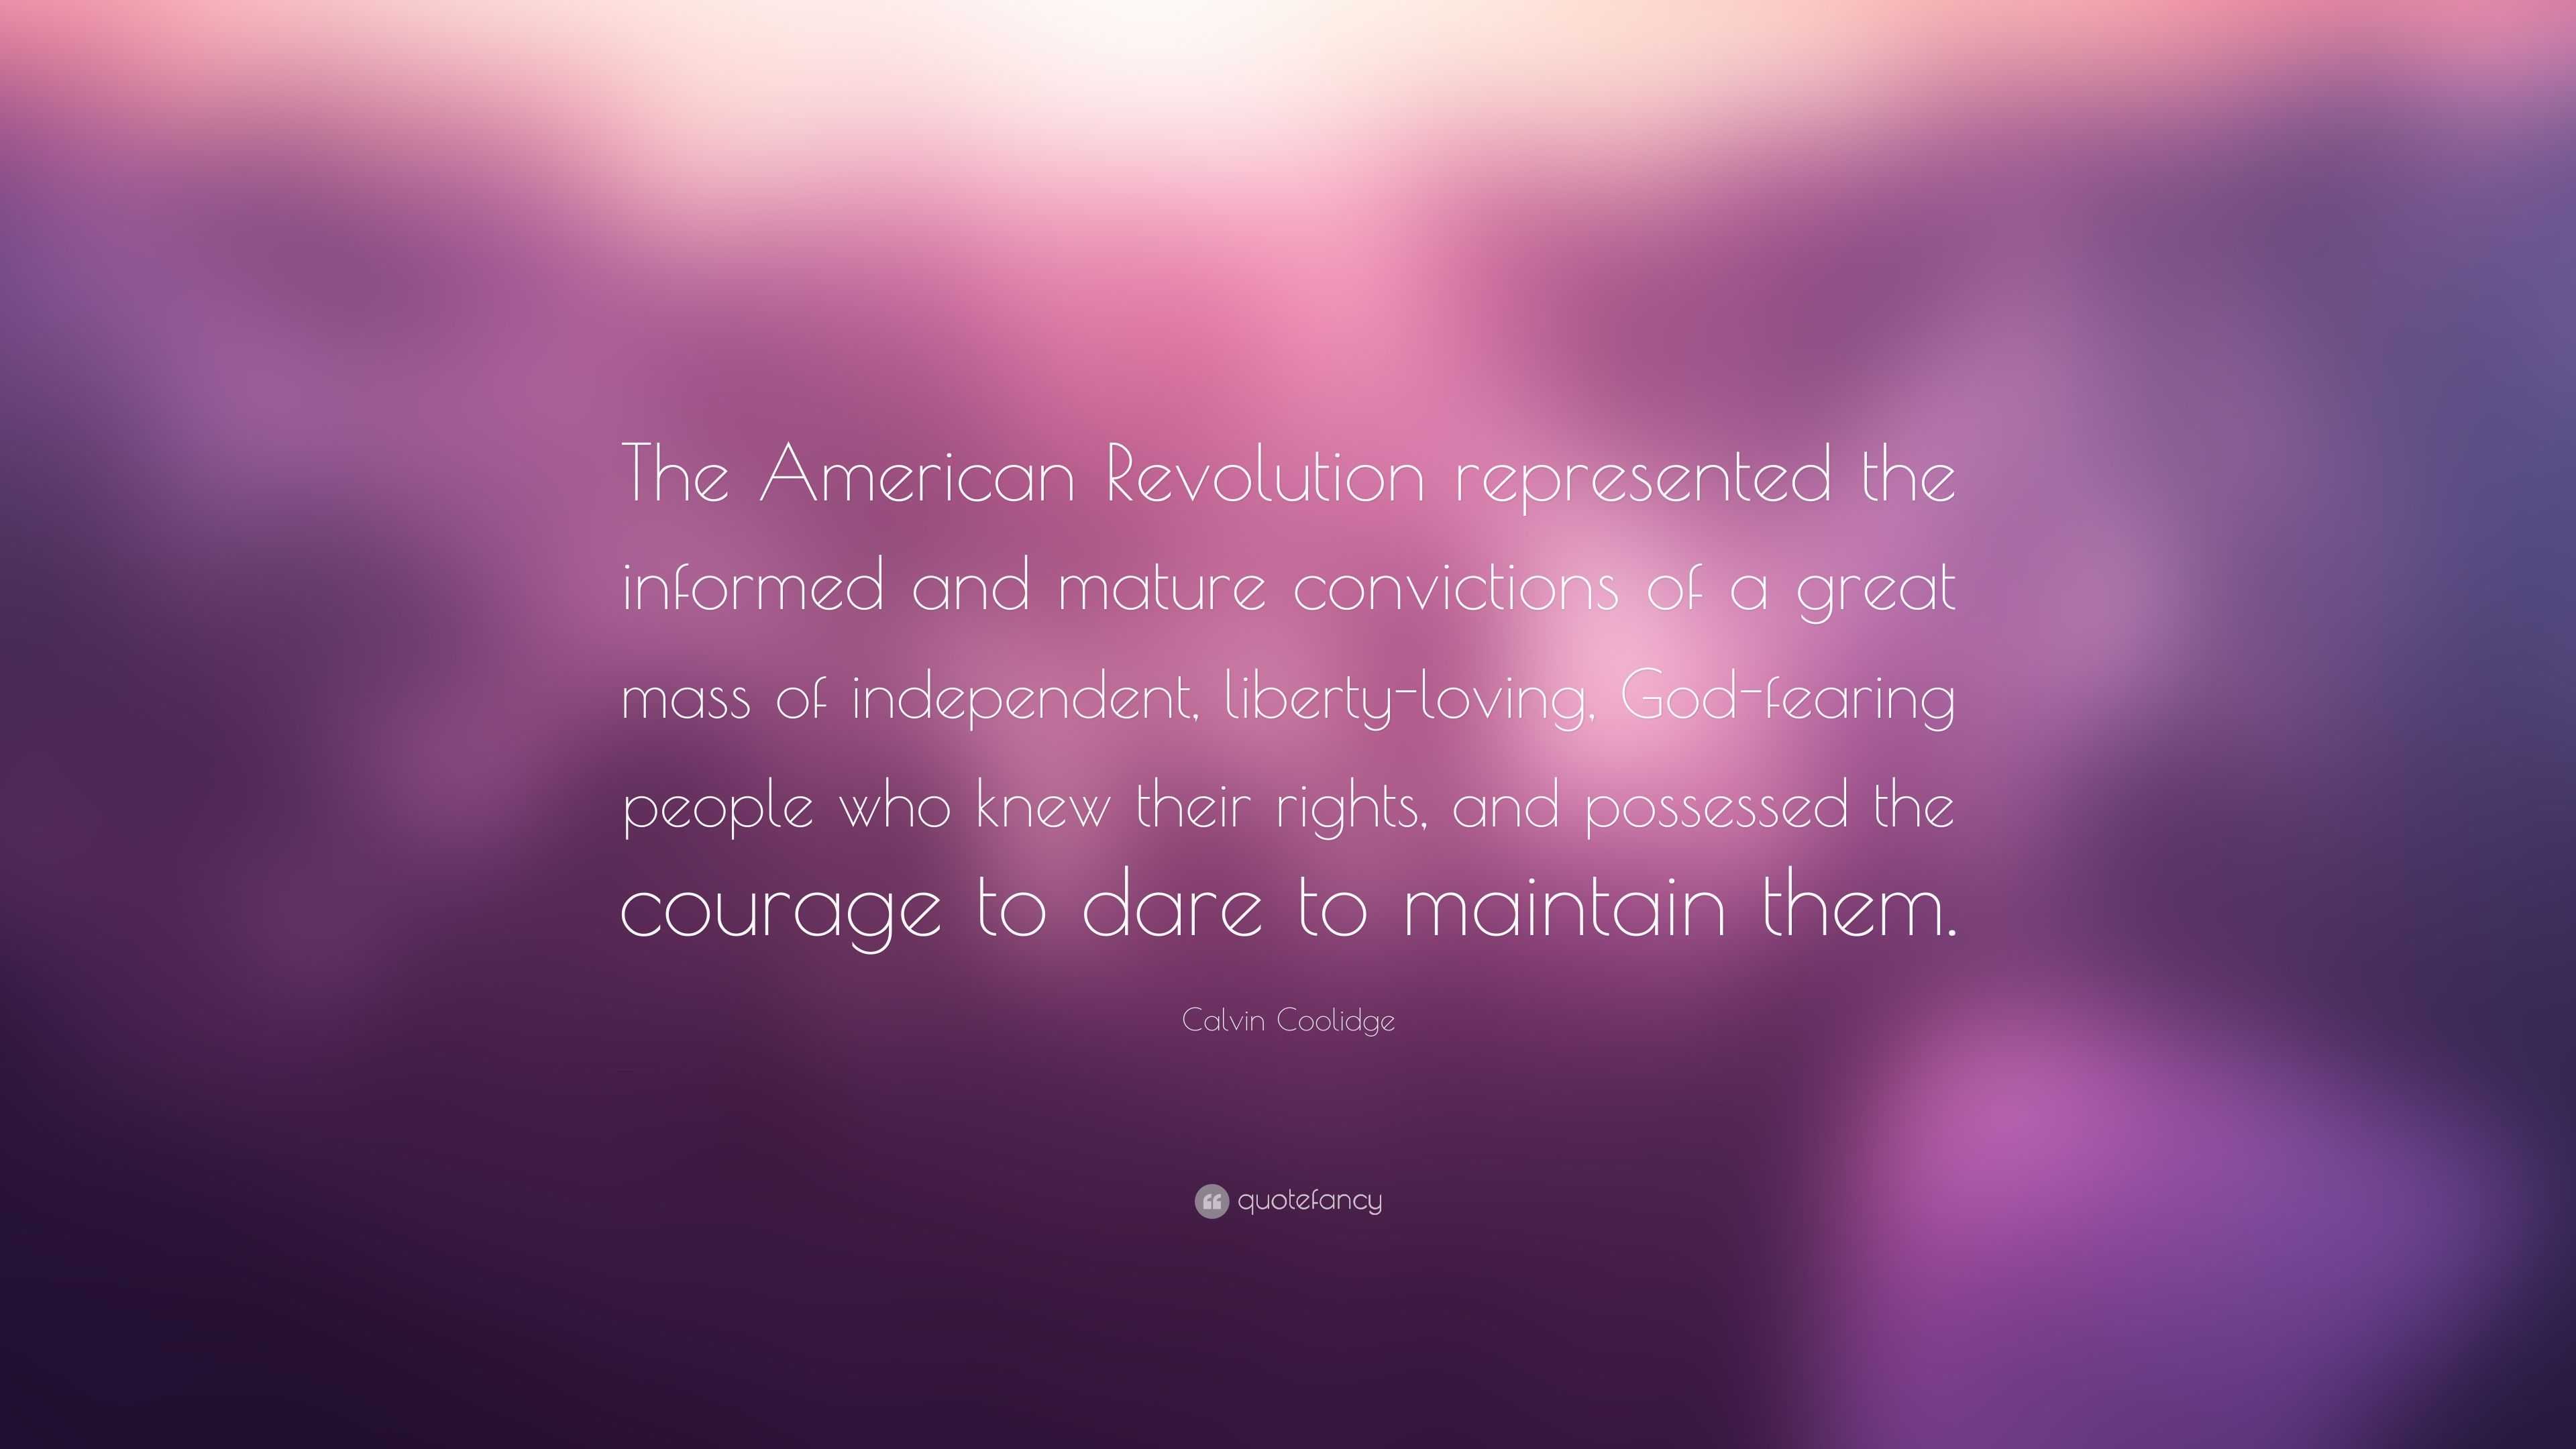 Calvin Coolidge Quote “The American Revolution represented the informed and mature convictions of a